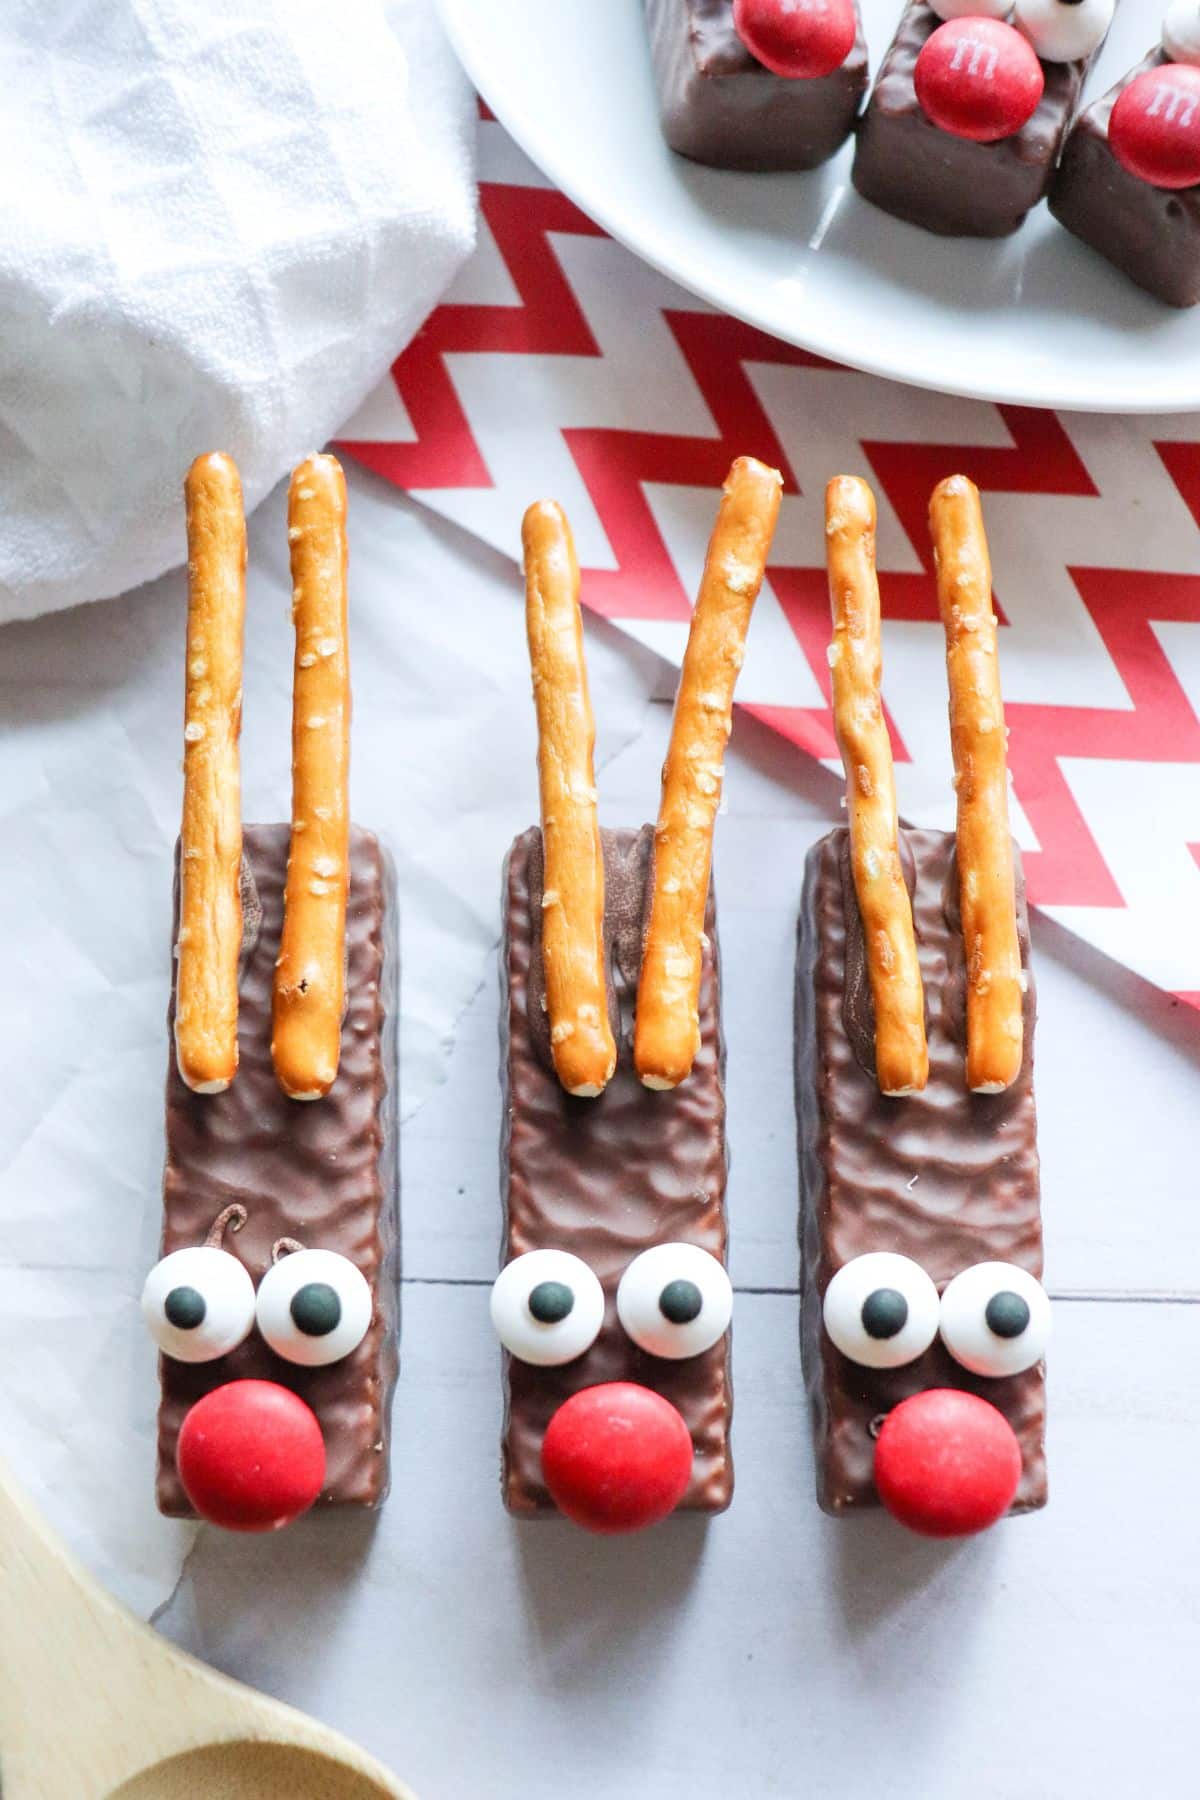 chocolate wafers with pretzel ears, googly eyes an a red M&M nose